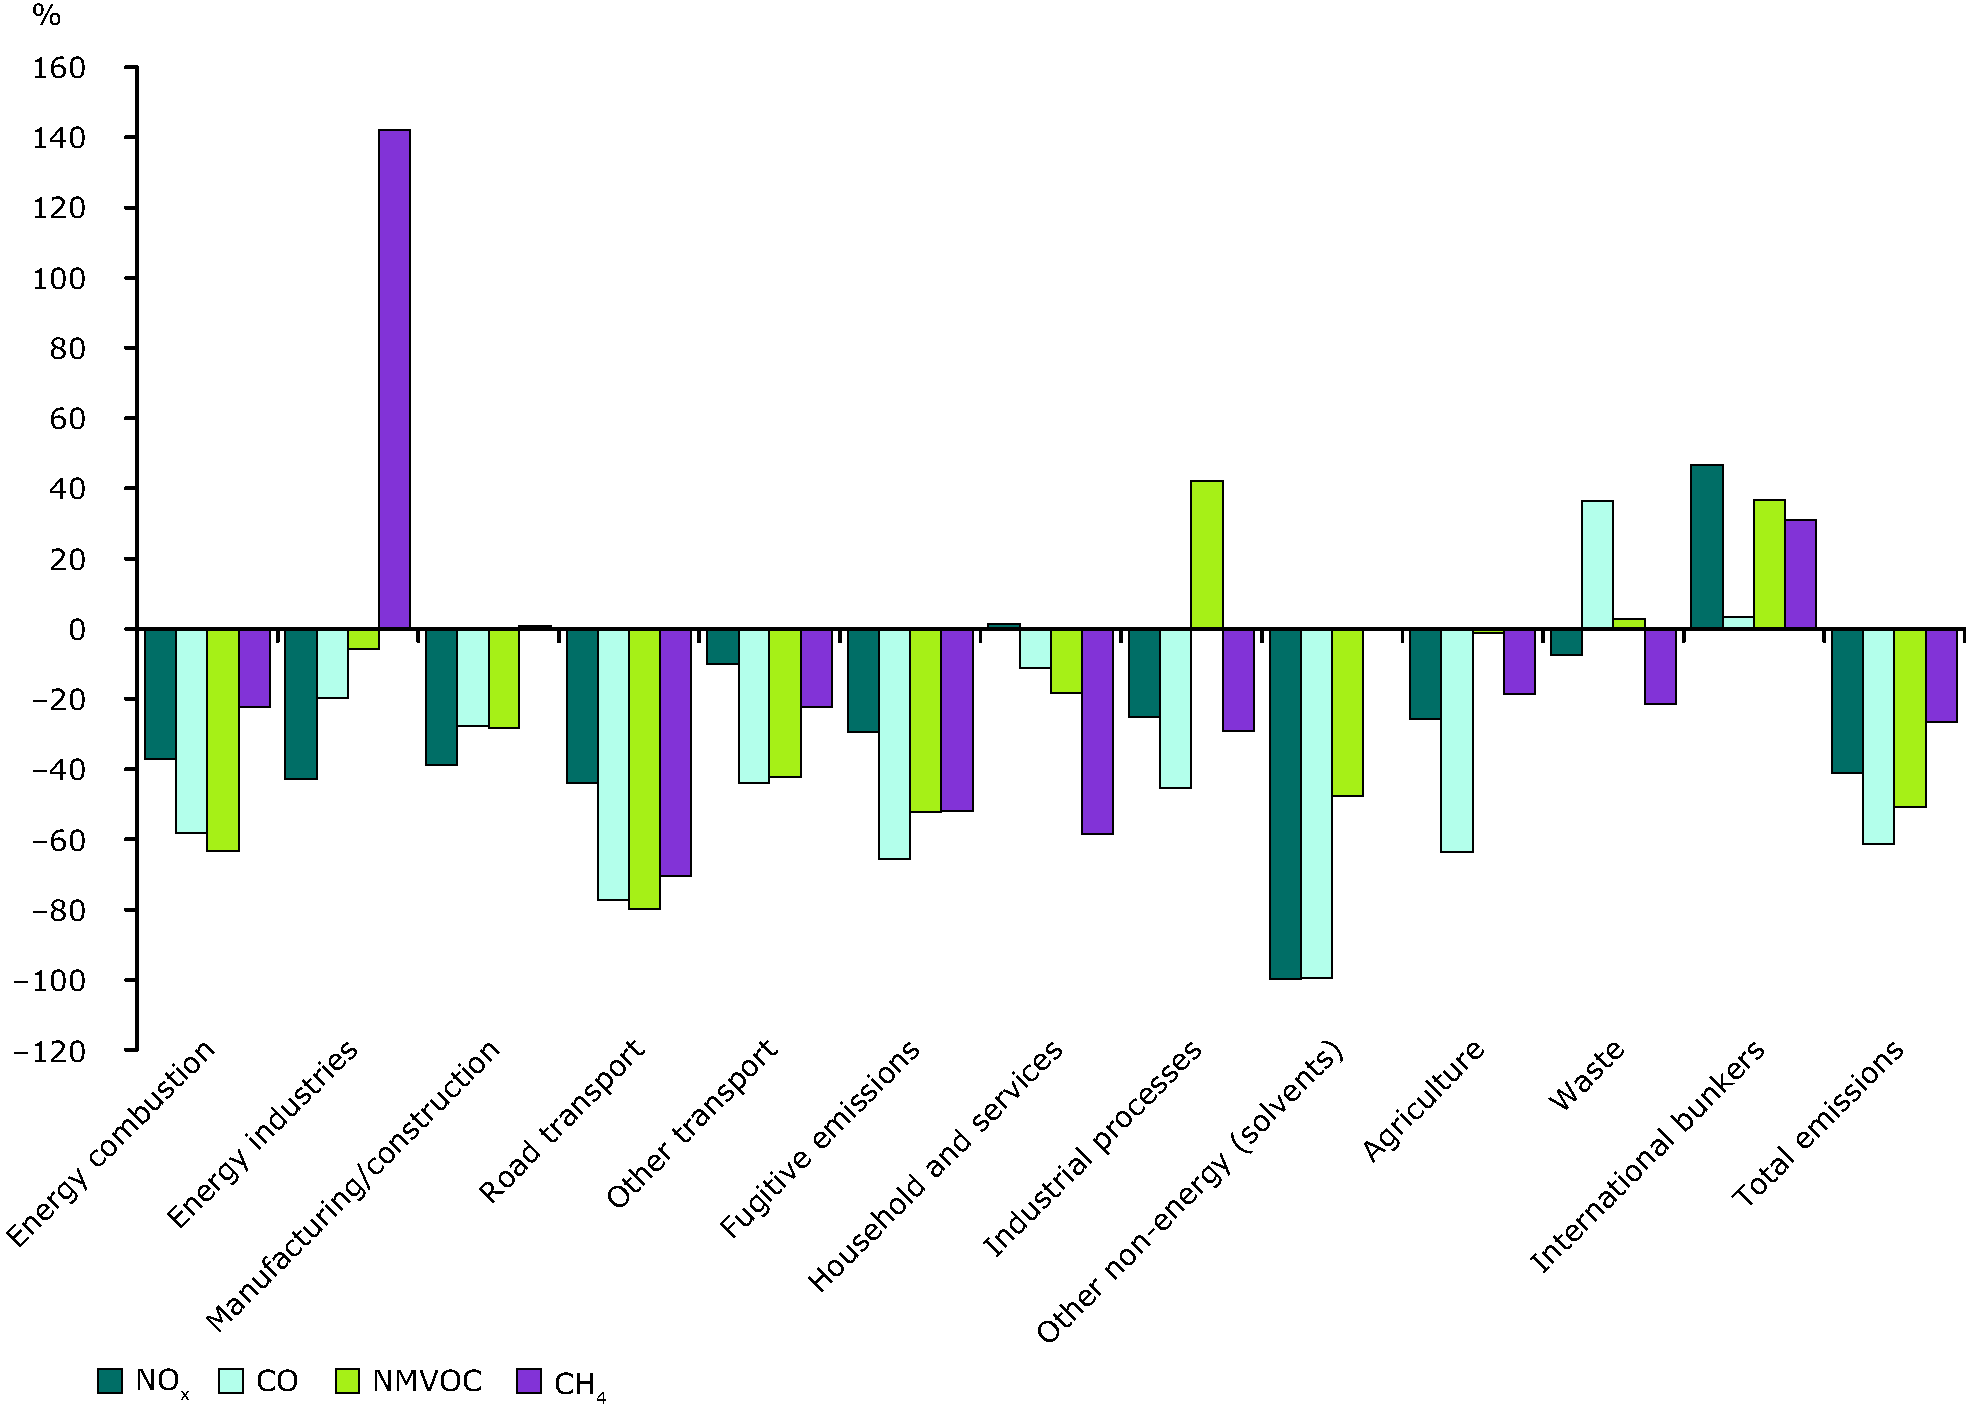 Changes (%) in emissions of ozone precursors by sector, 1990-2009, EEA-32